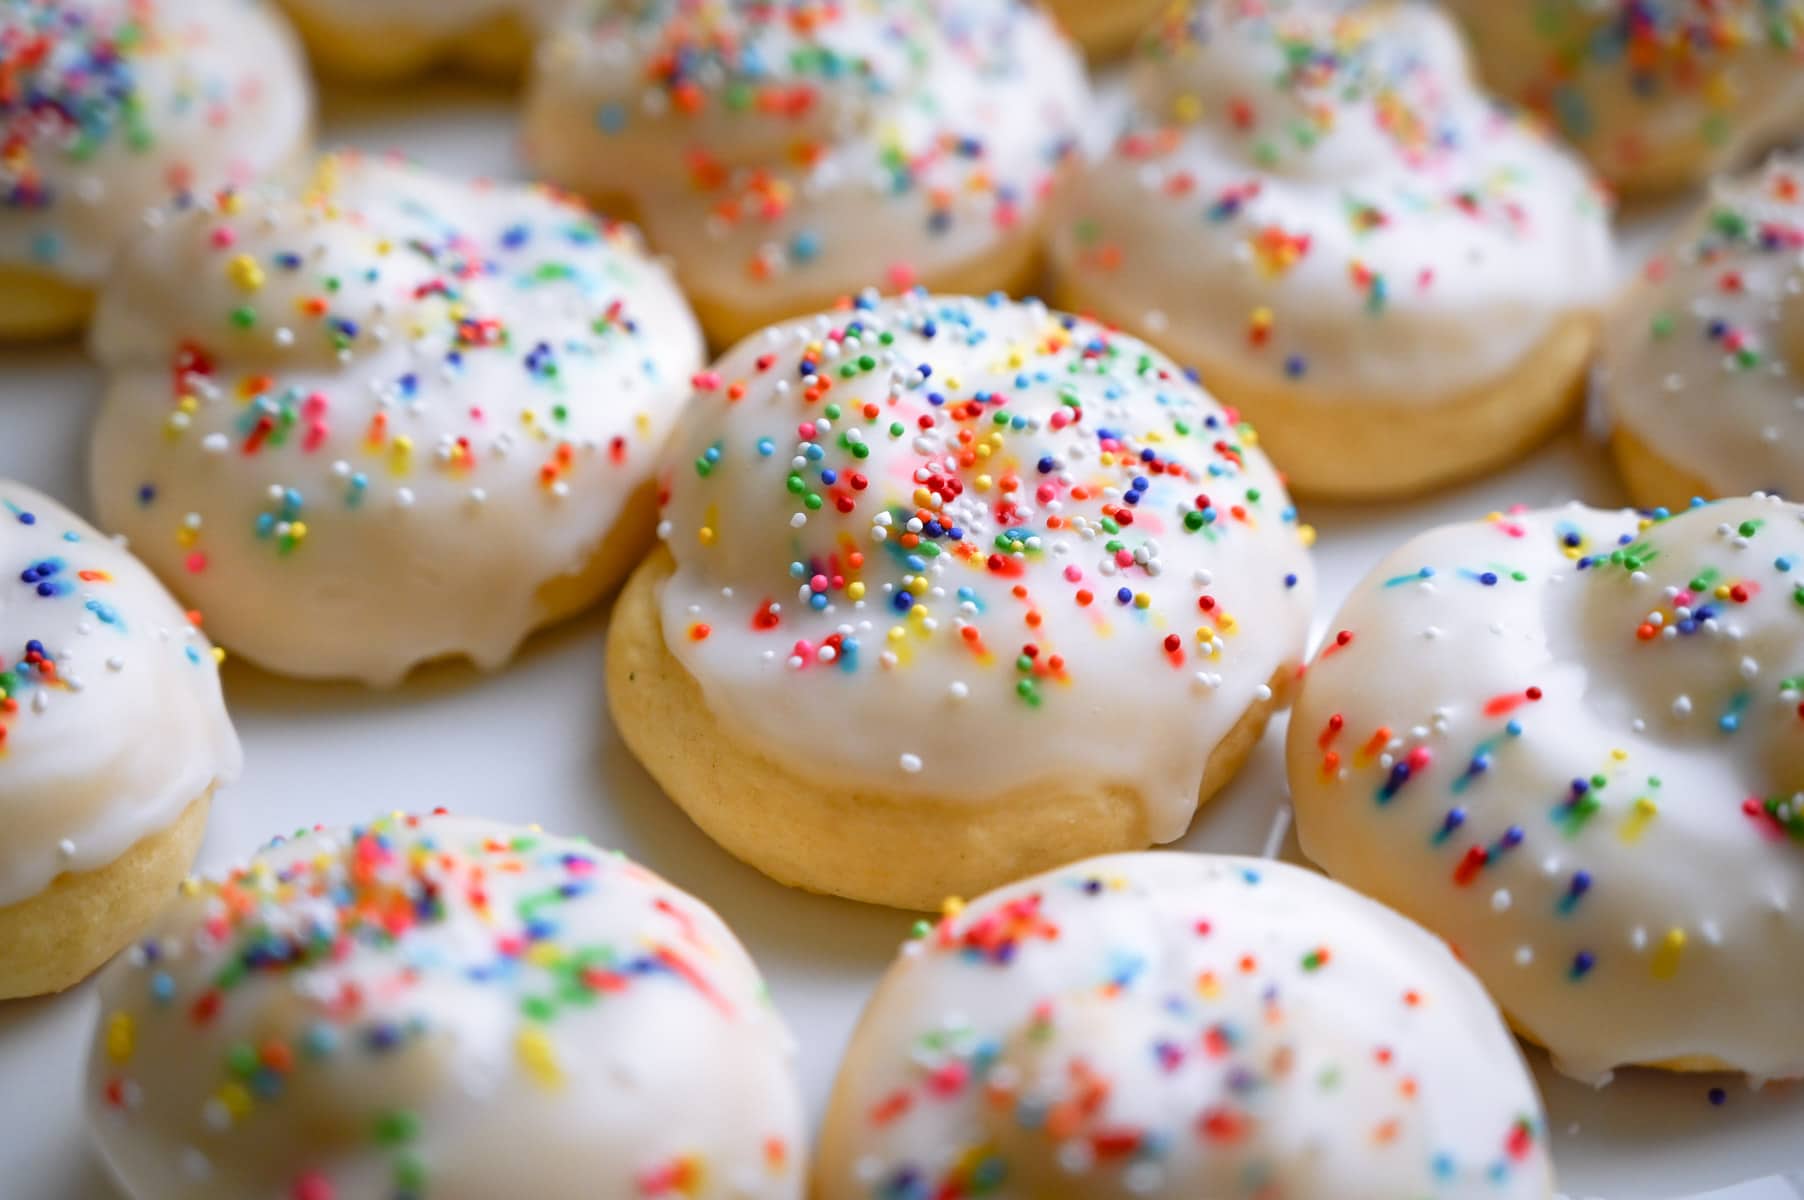 Close up of a group of Italian knot cookies with white glaze and colorful sprinkles.